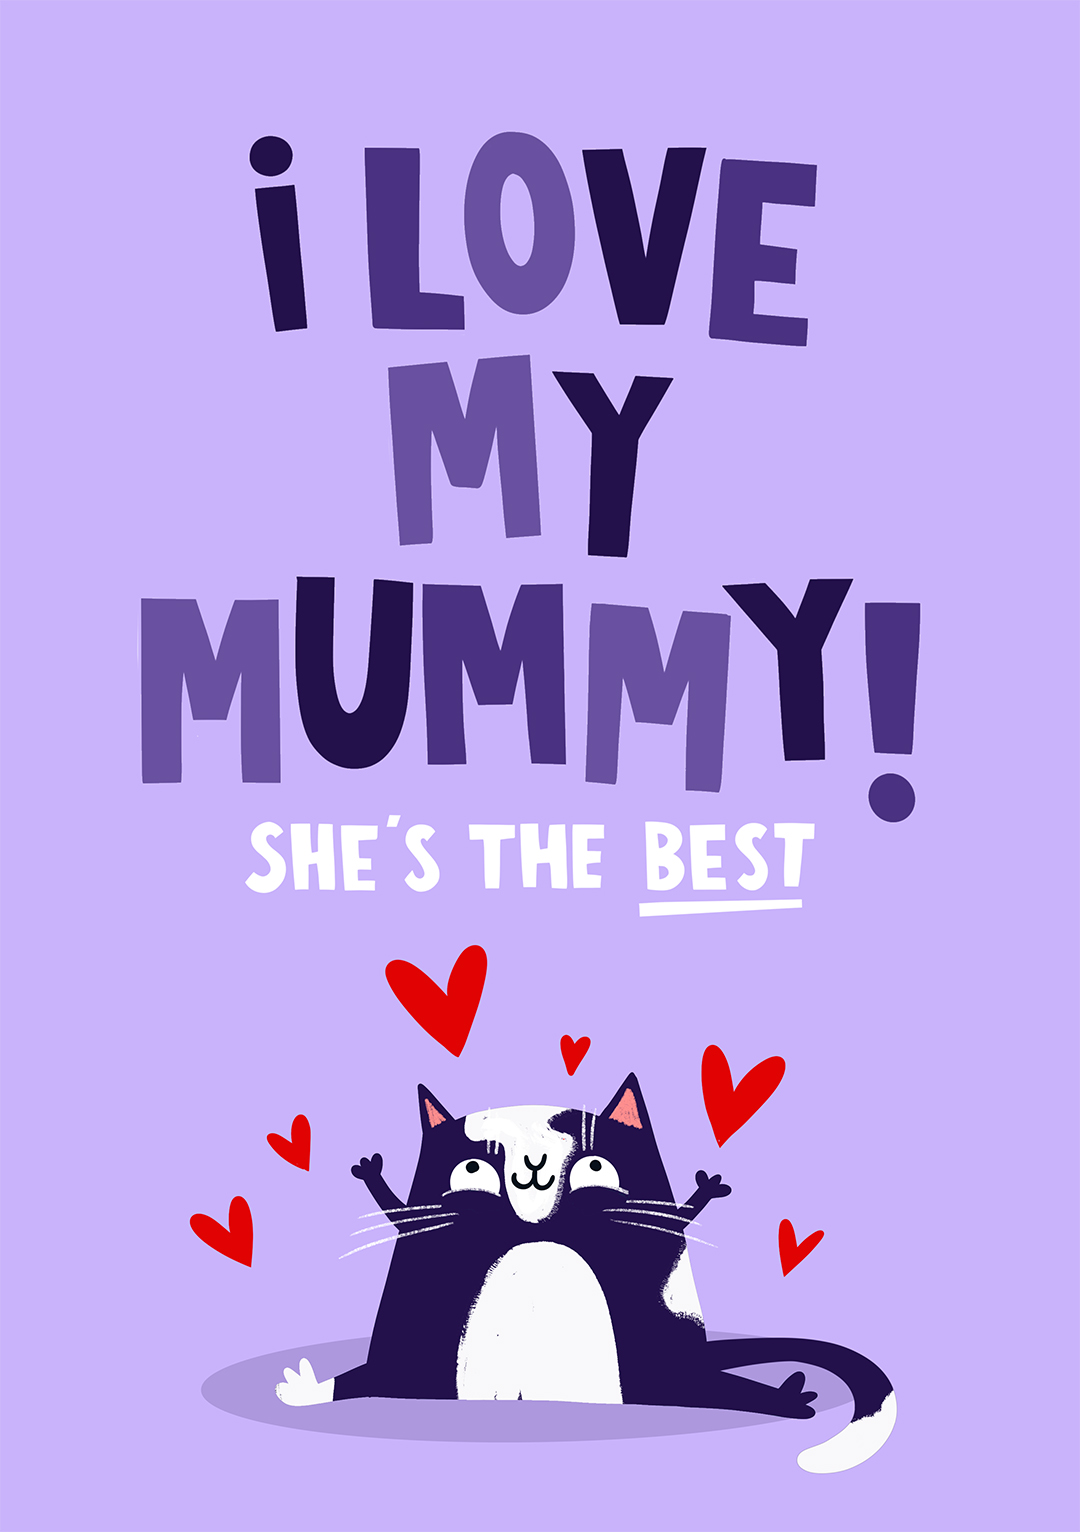 Best Mummy Mother's Day Card